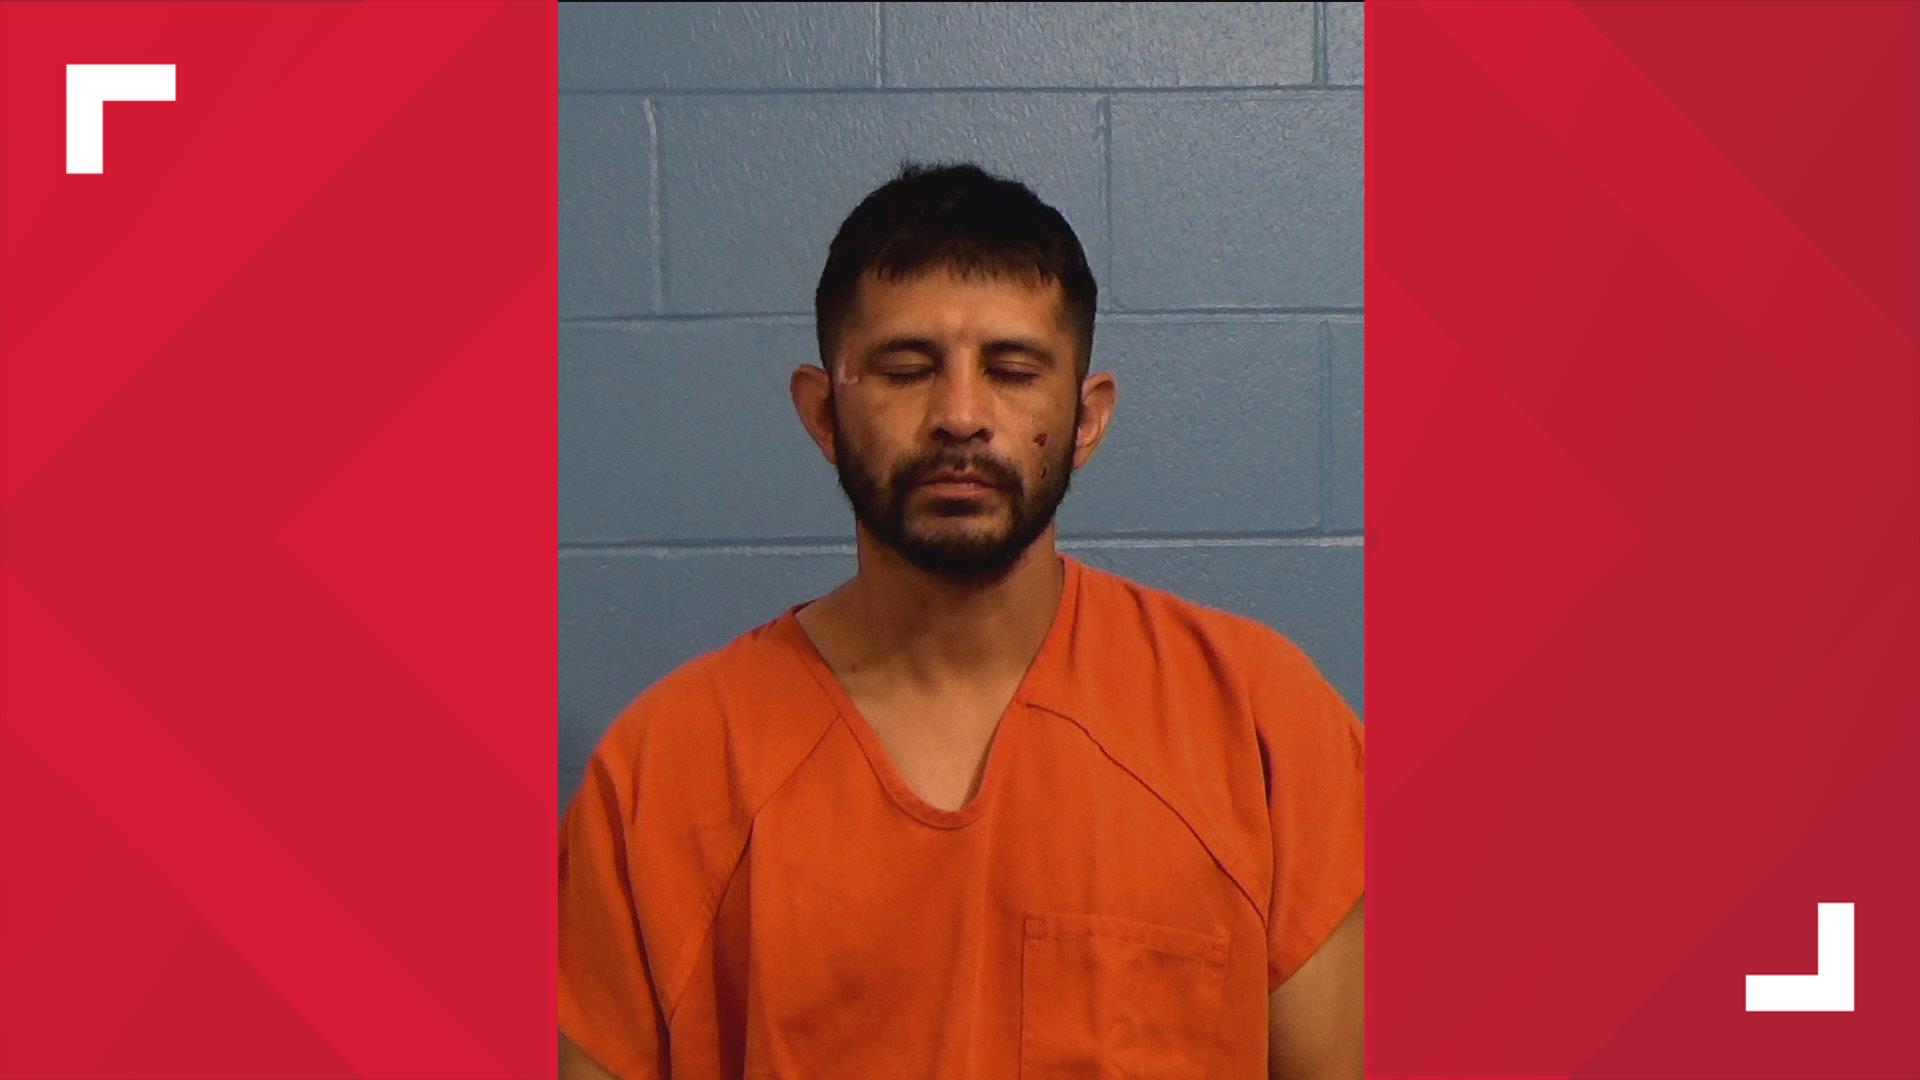 A Hutto man is facing 99 years in prison for sexually assaulting a child.